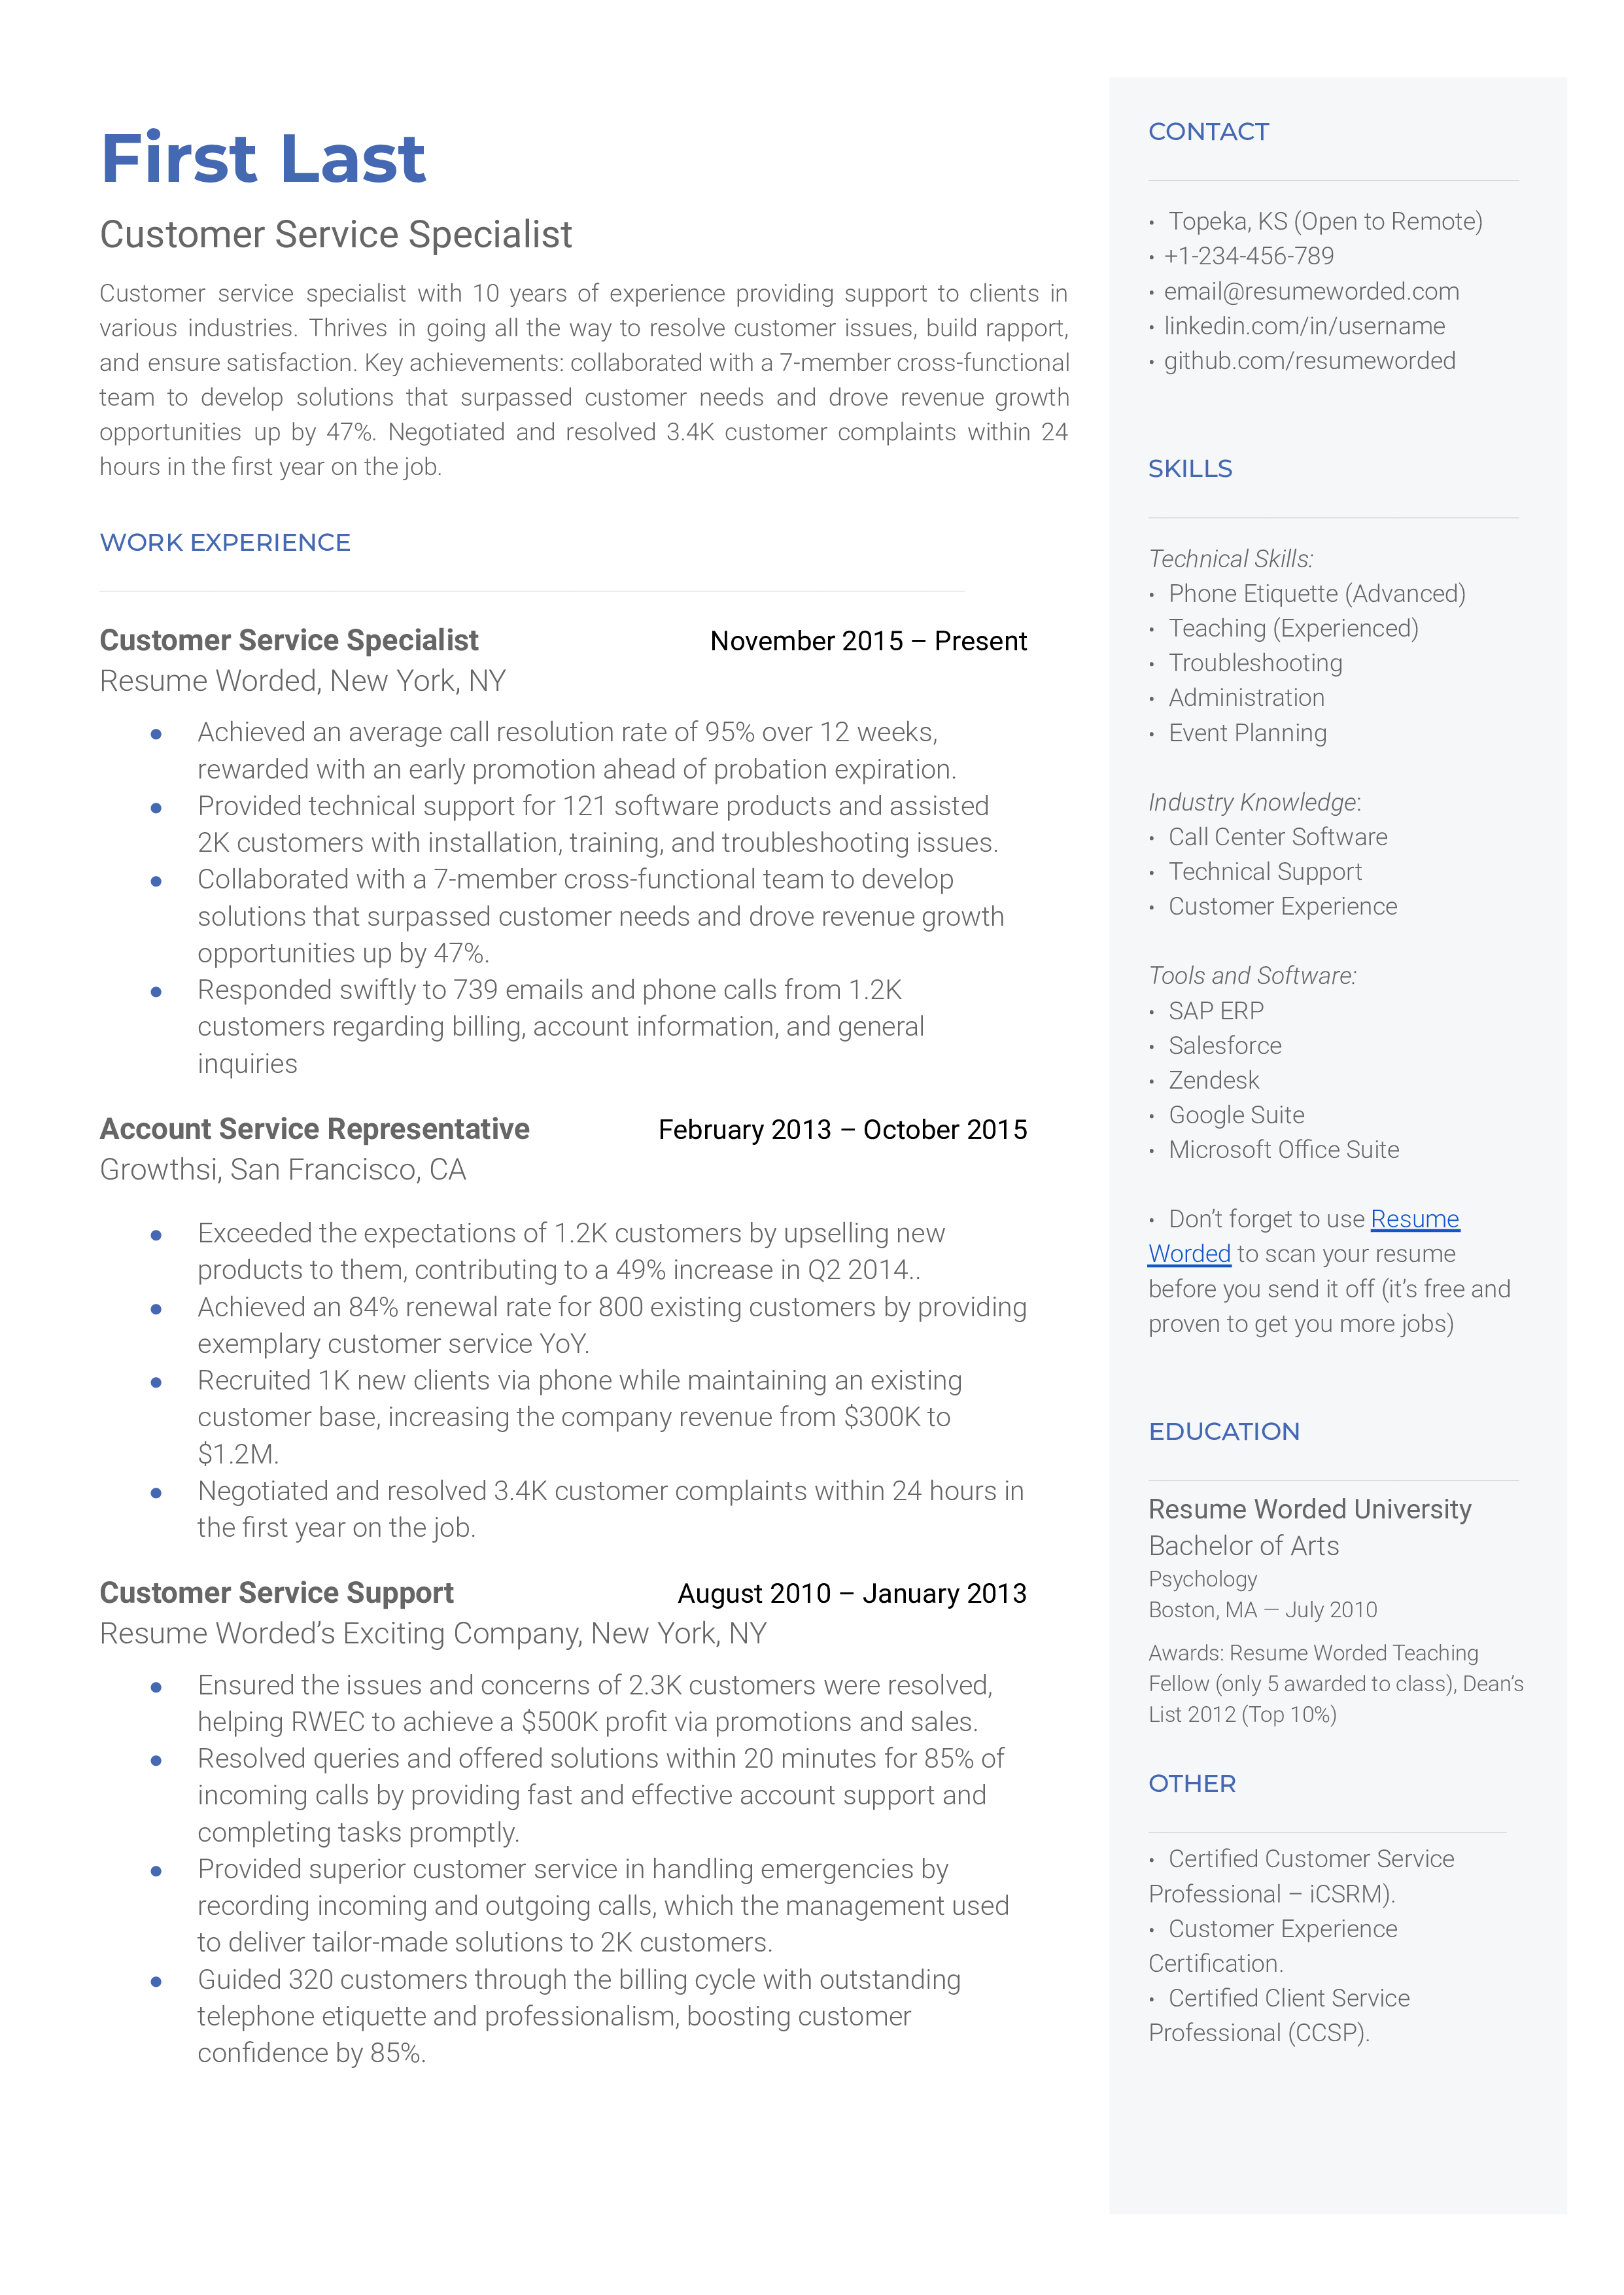 A customer service specialist resume sample that highlights the applicant’s skills section and certifications.